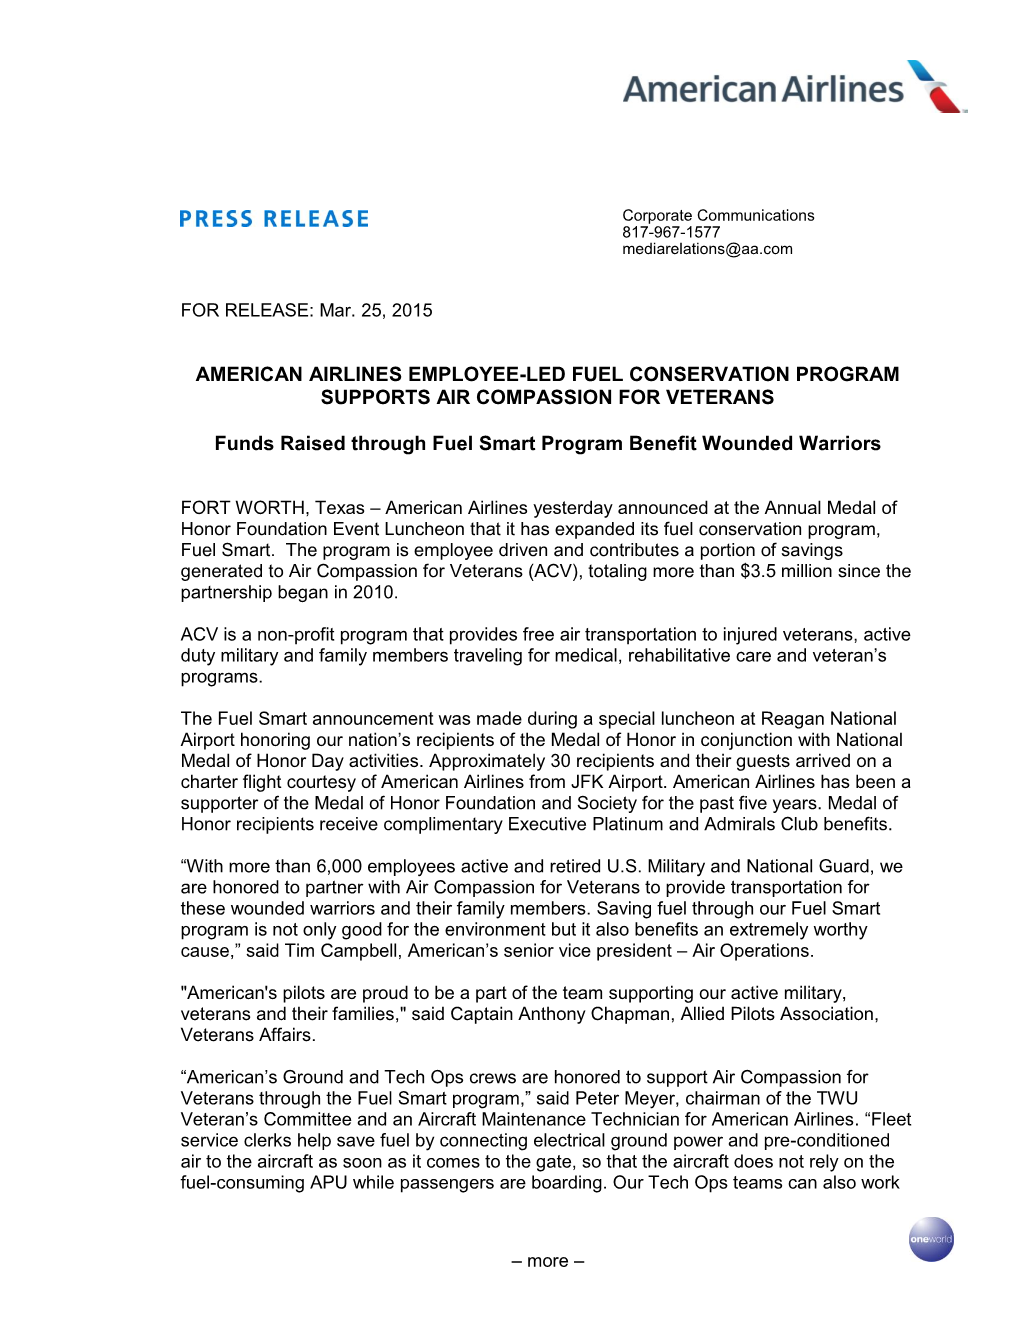 American Airlines Employee-Led Fuel Conservation Program Supports Air Compassion for Veterans